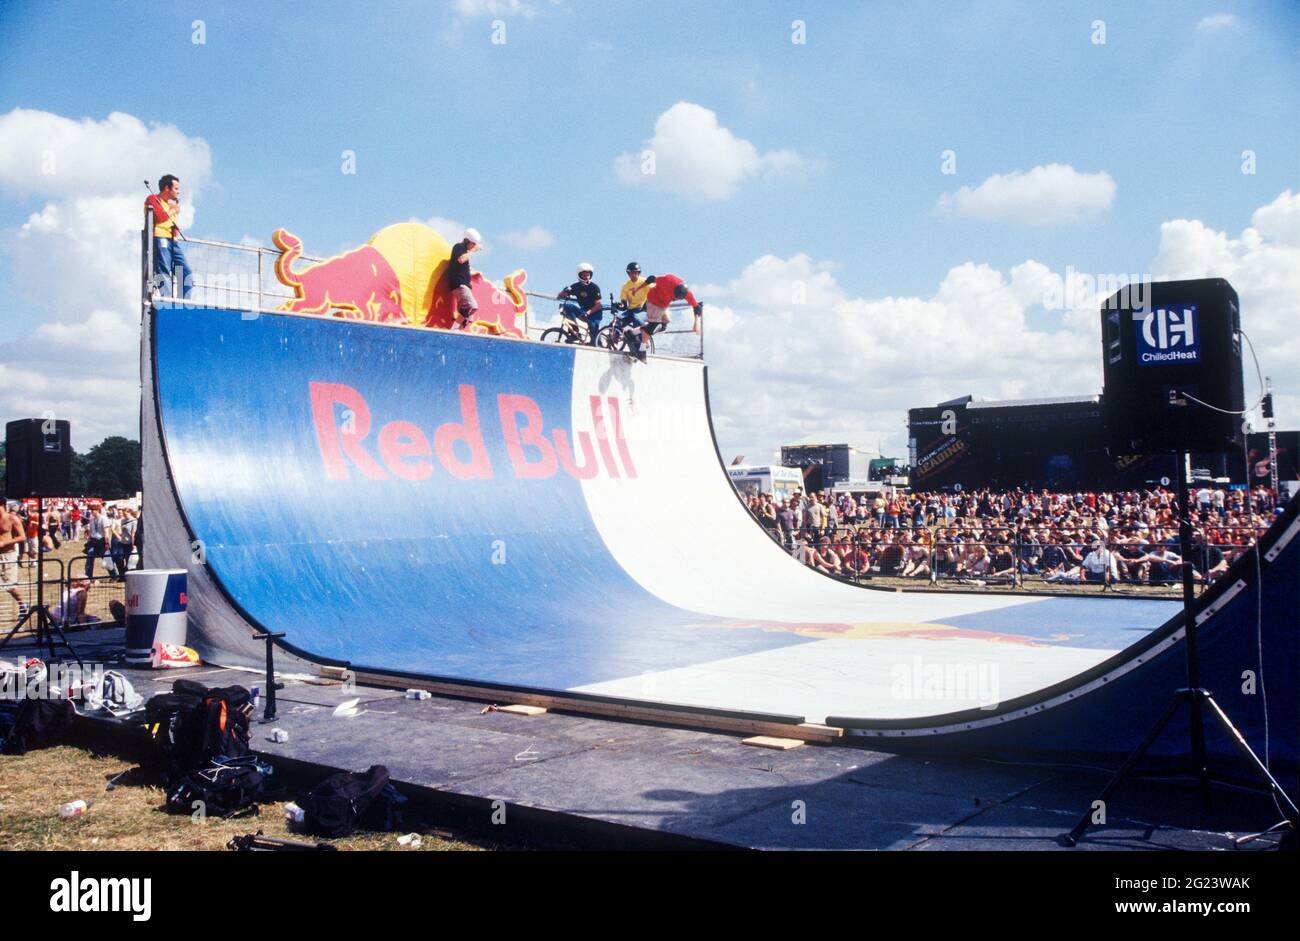 The Red Bull skateboard half pipe at the Reading Festival 2002 Stock Photo  - Alamy